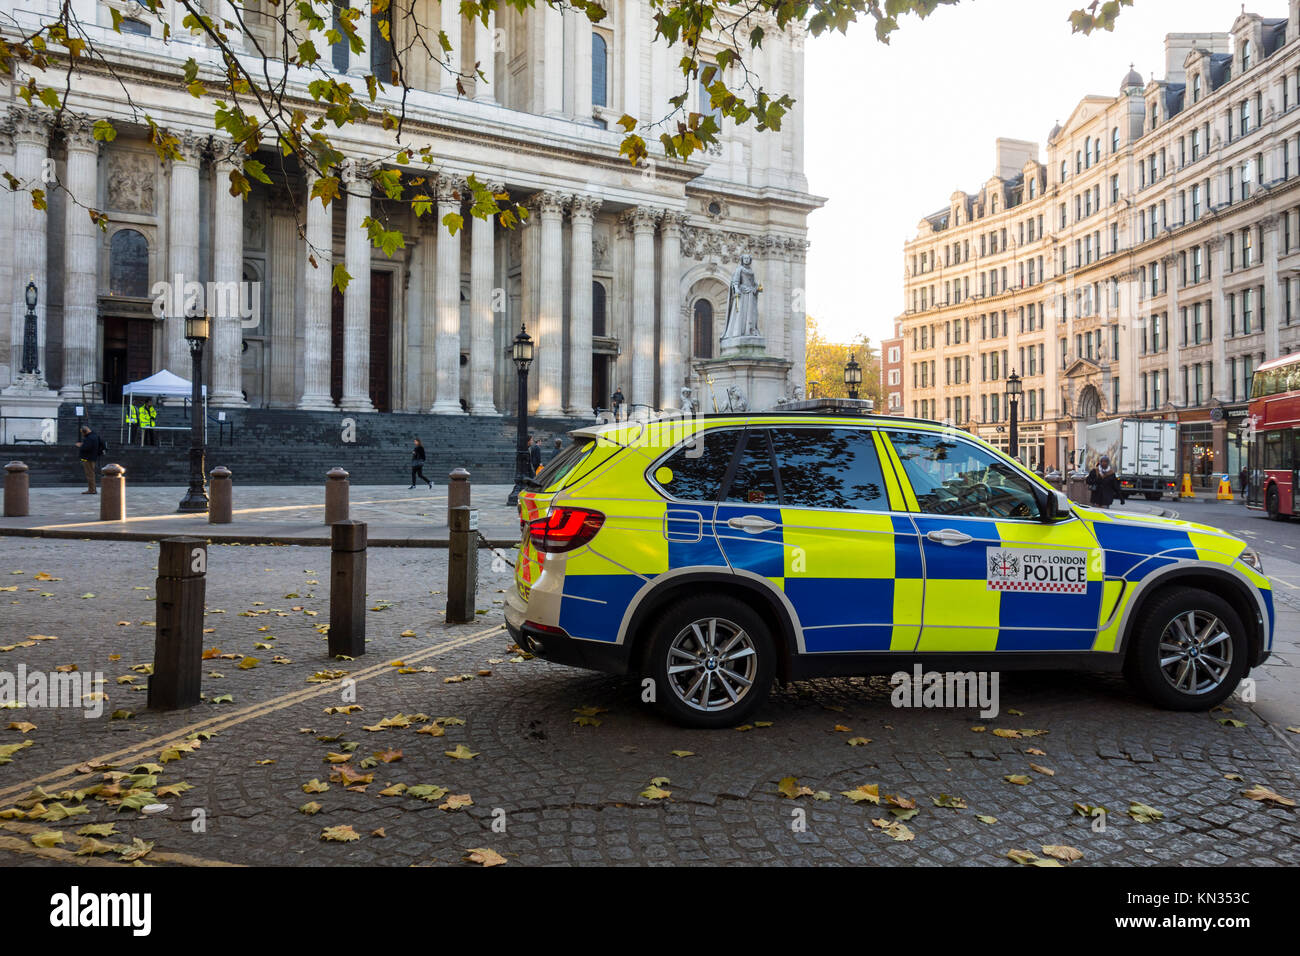 City of London police vehicle parked in St Paul's Churchyard, London, UK Stock Photo